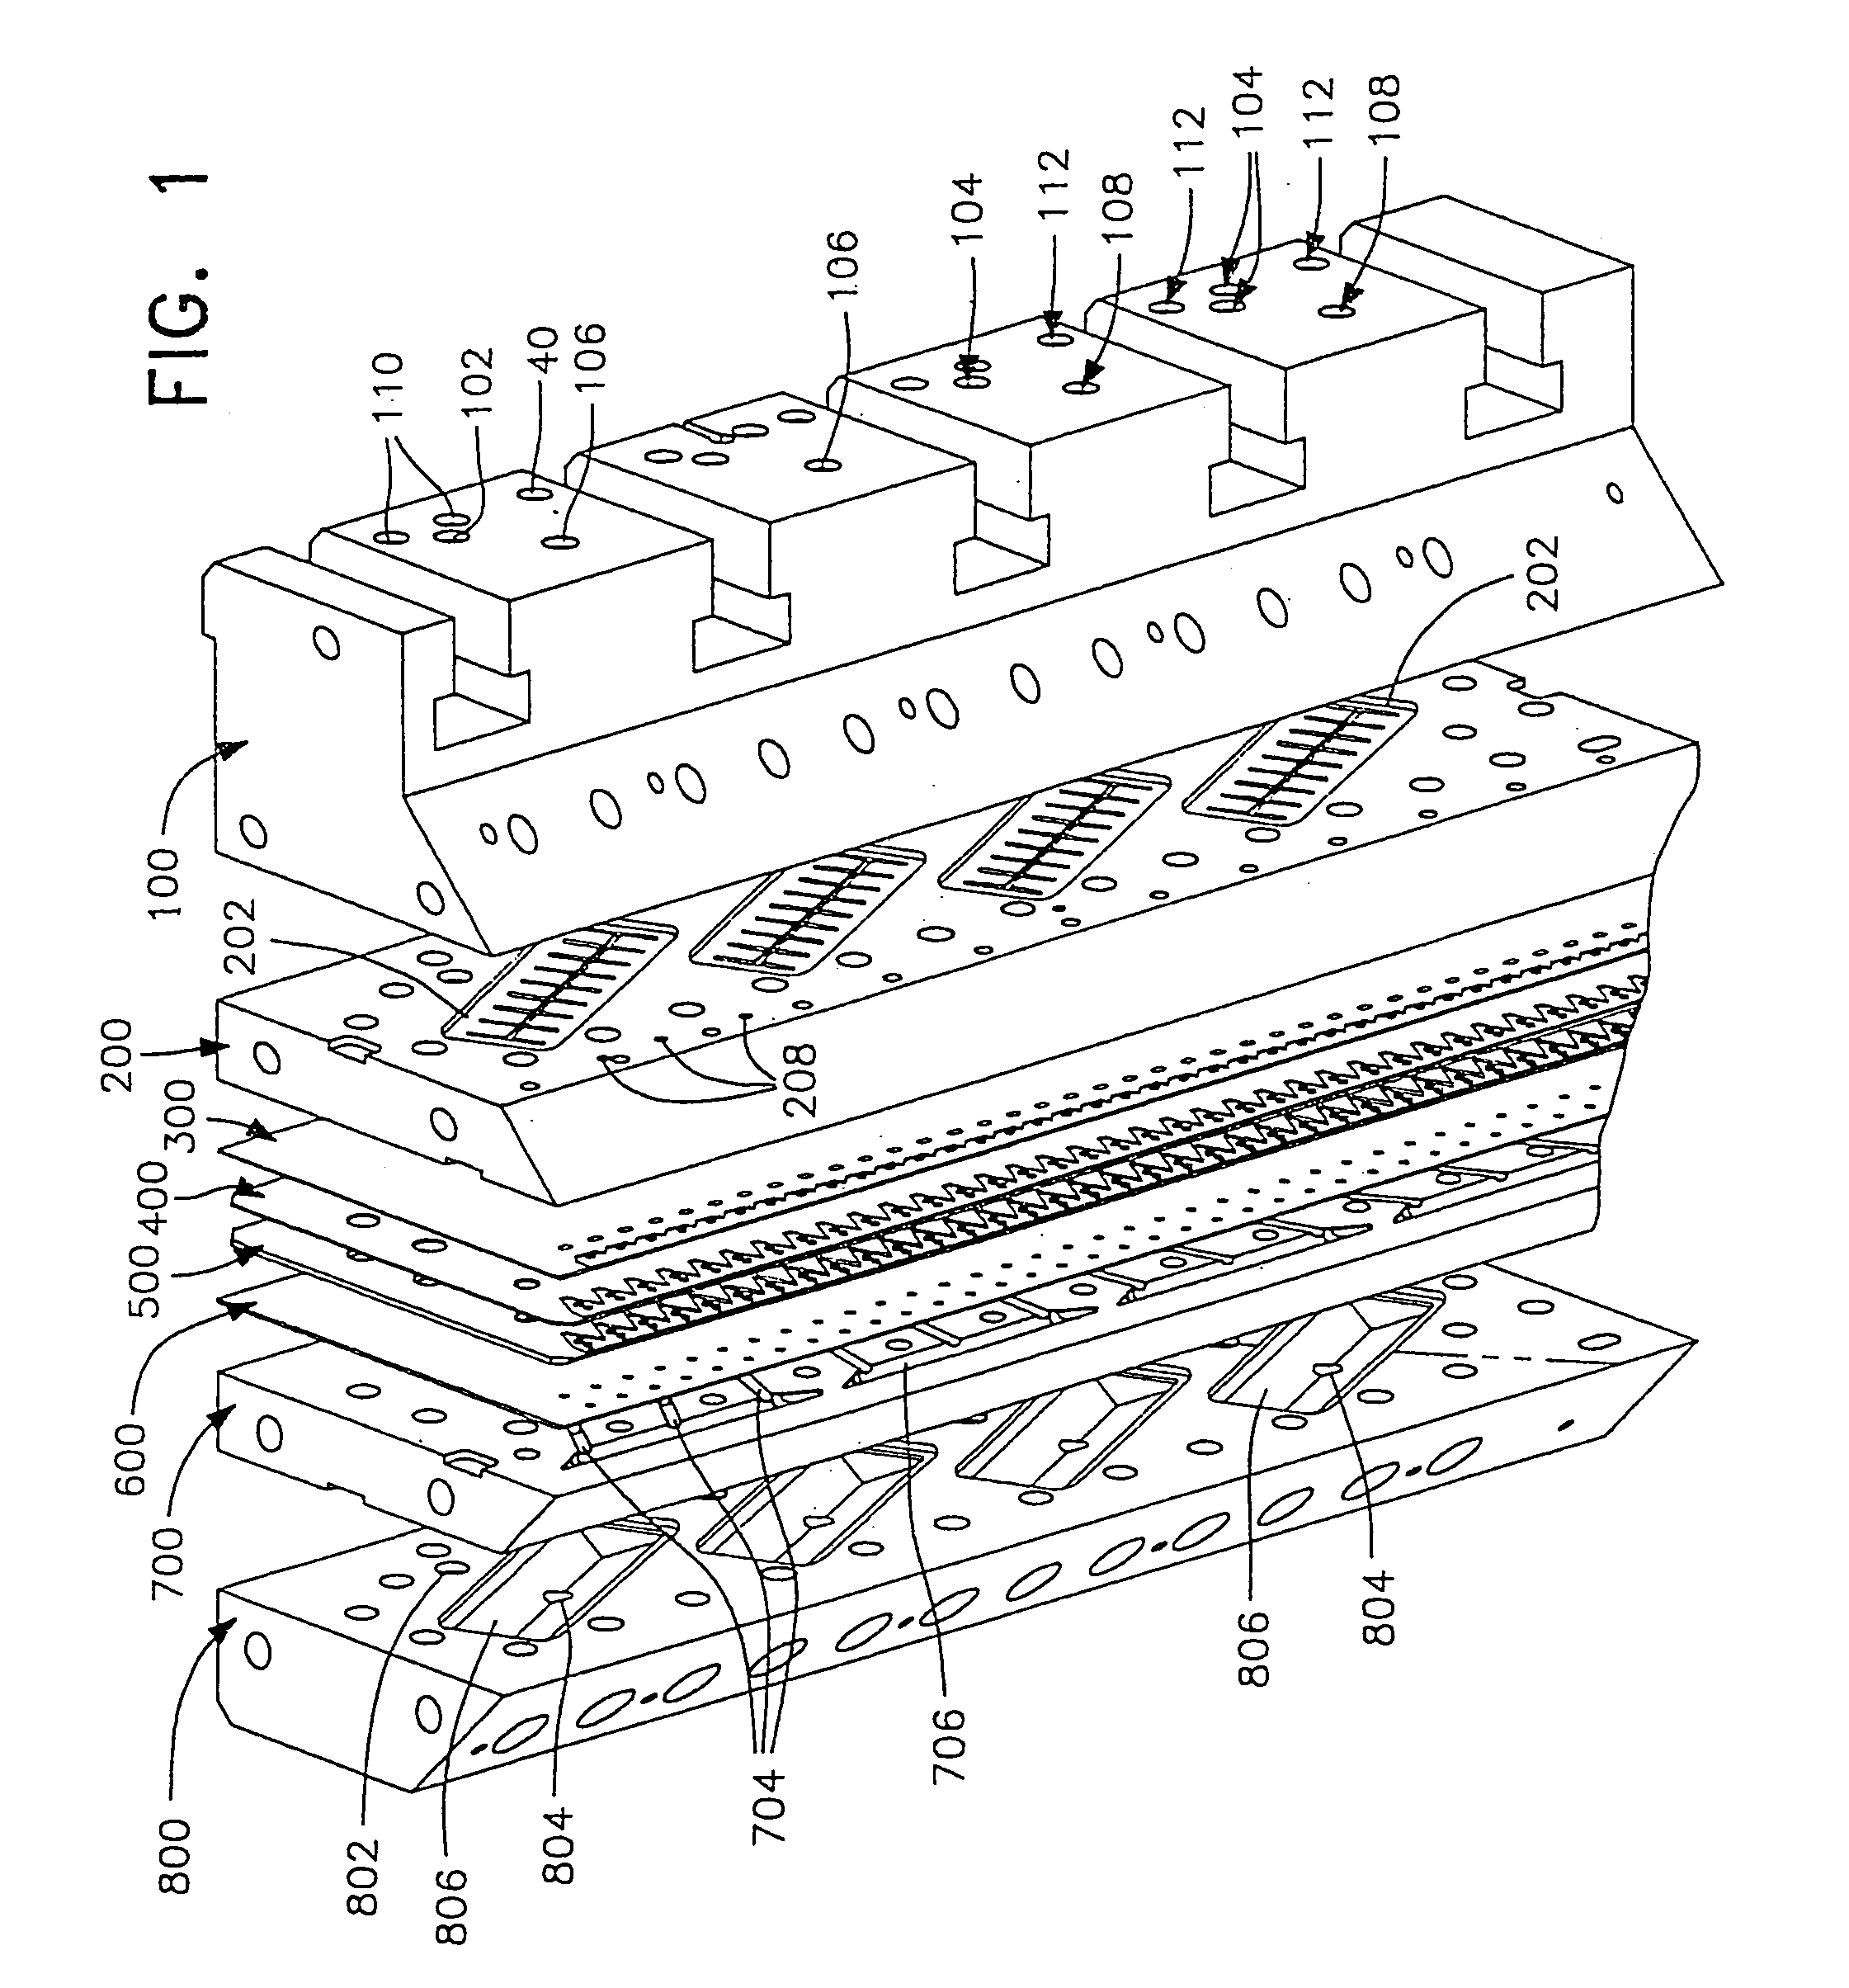 Method and apparatus for spinning a web of mixed fibers, and products produced therefrom